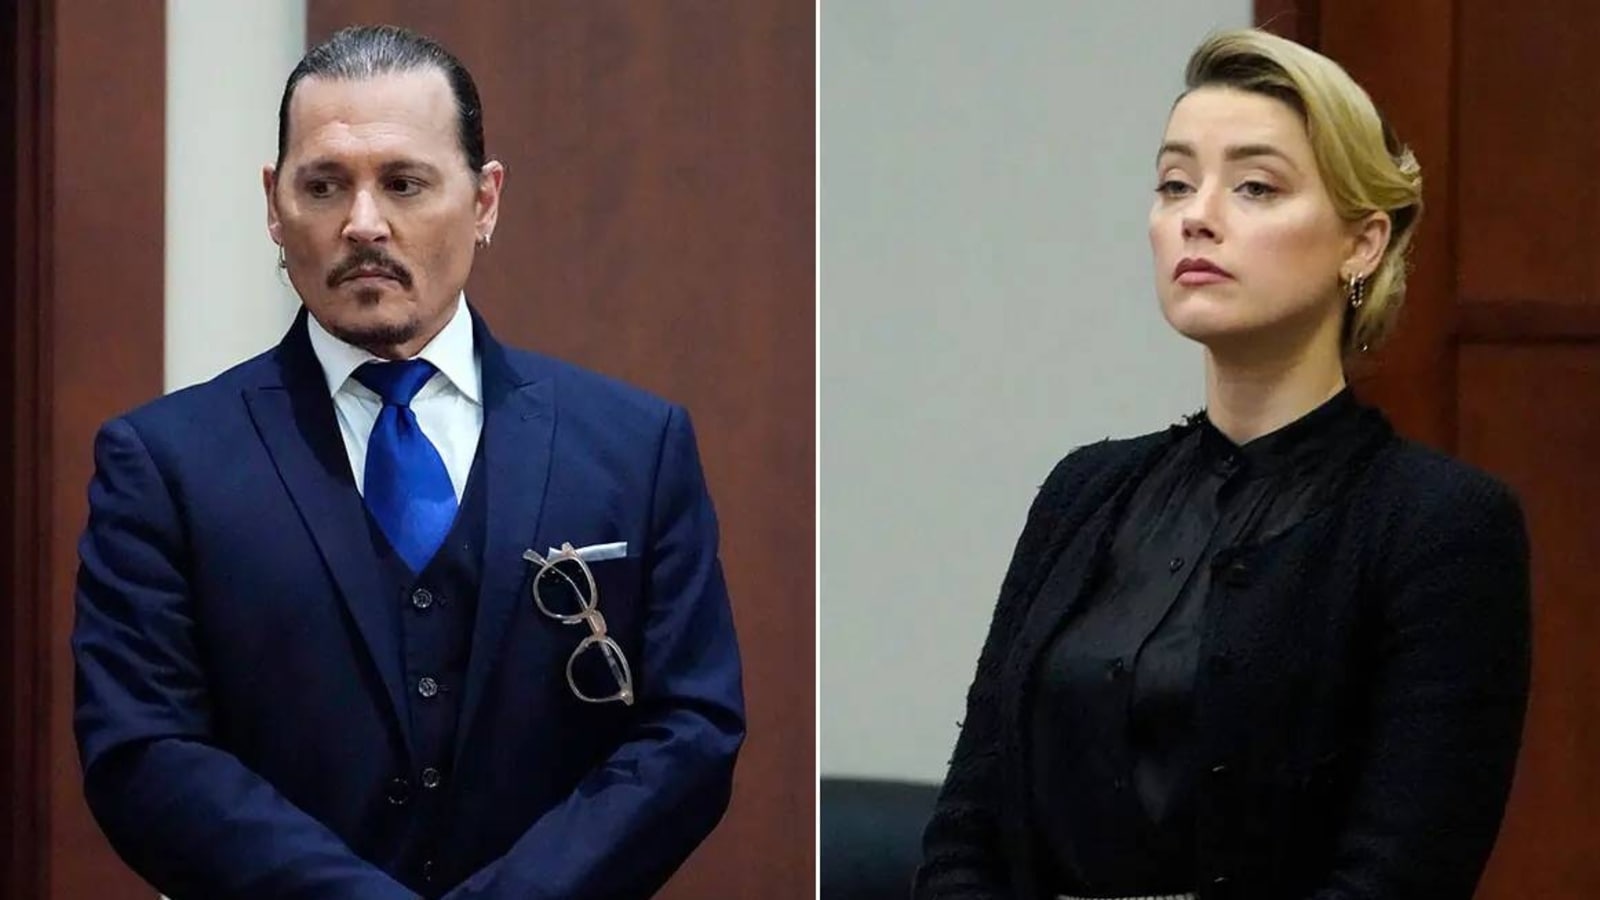 Johnny Depp Amber Heard trial being adapted into film fans say